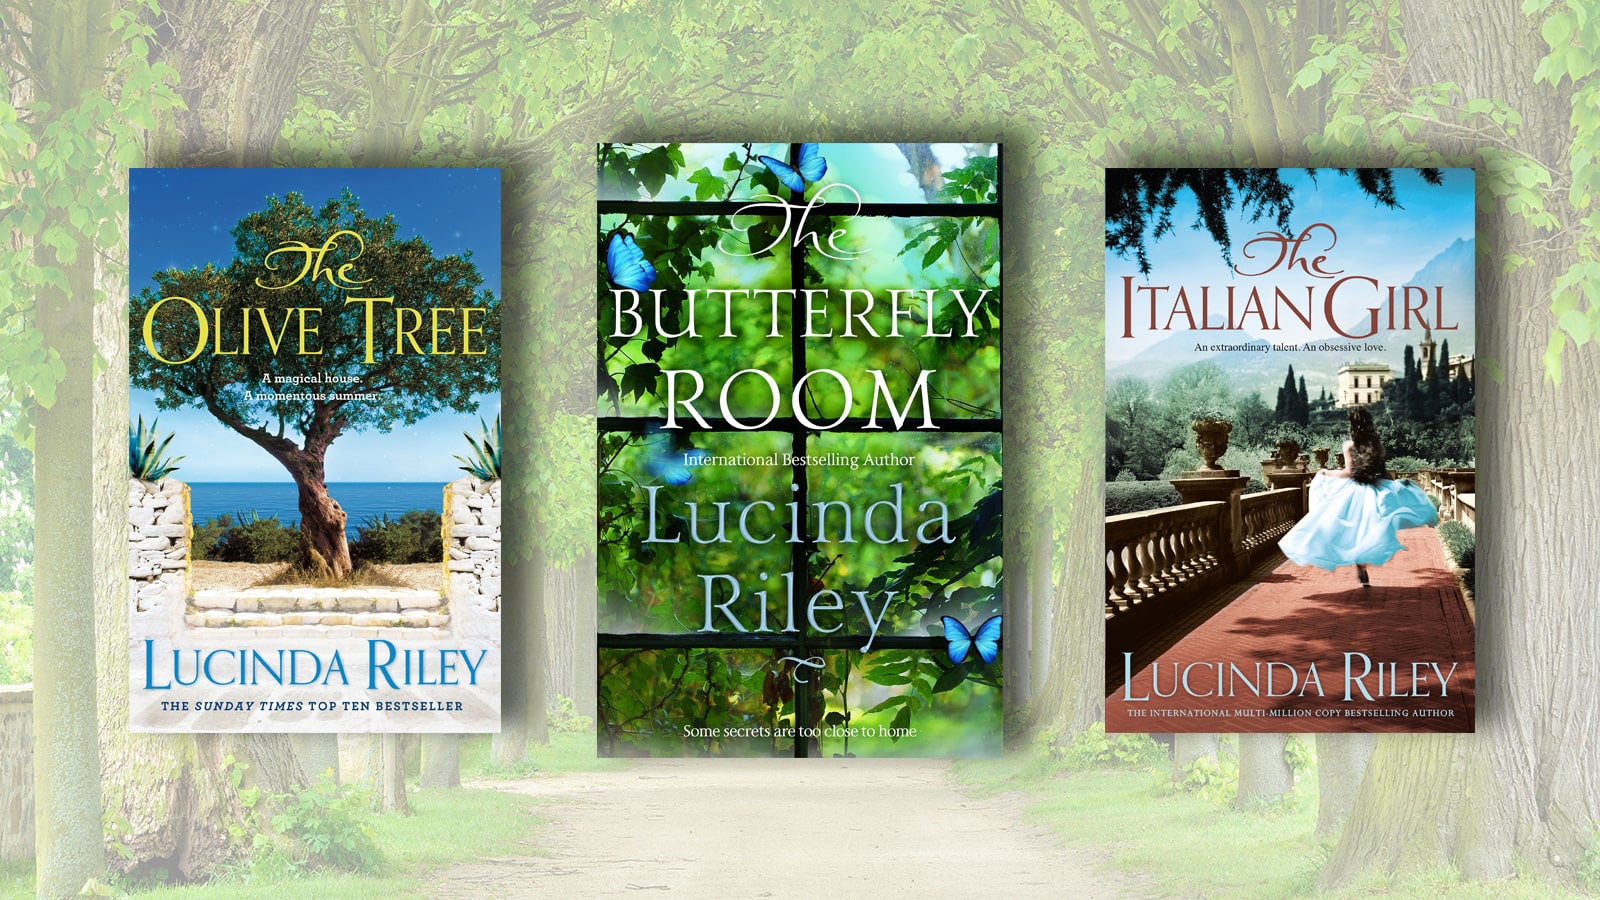 Book covers of the Olive Tree, The Butterfly Room and The Italian Girl on a background of a faded forest